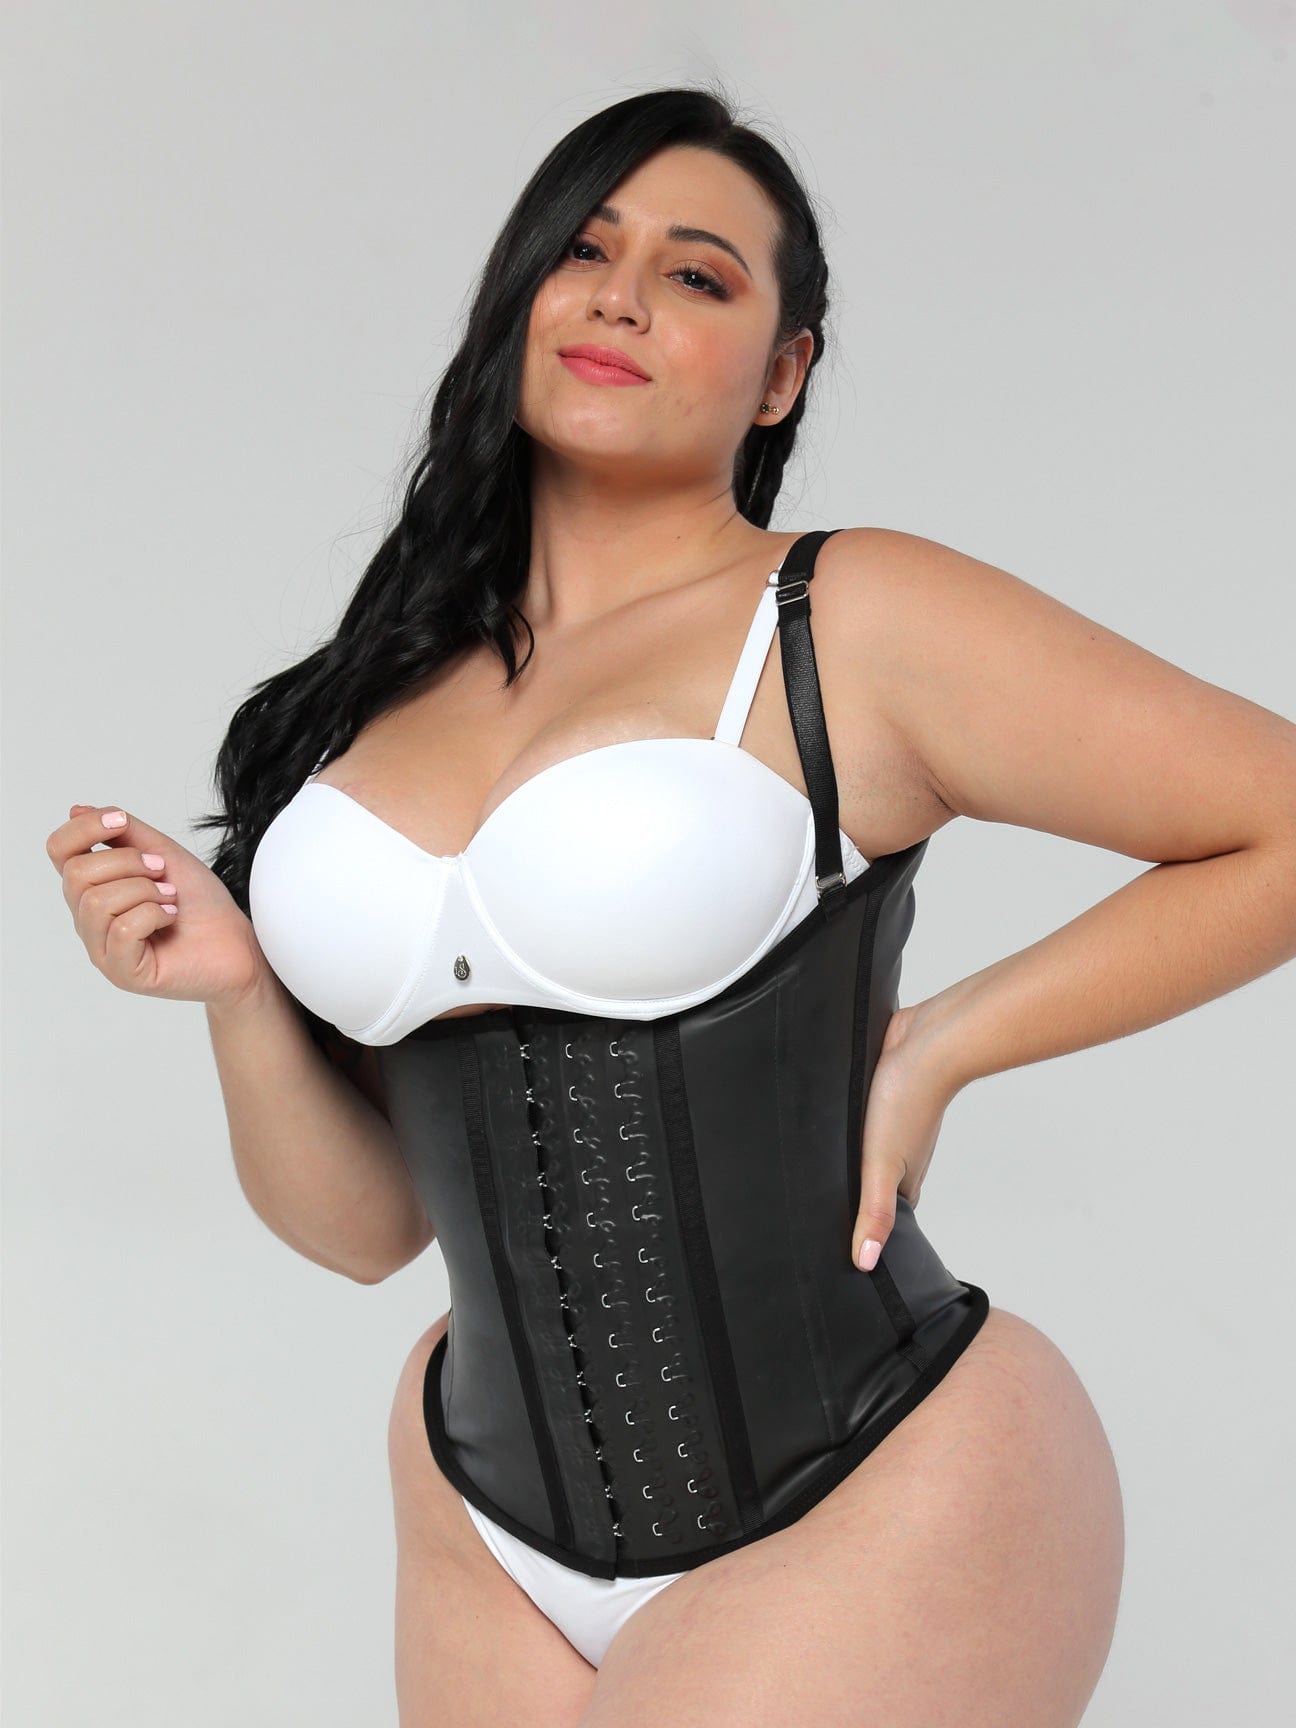 Eimee Handmade Leather Corset Waist Trainer for women-colombian fajas for  women-Plus Size Corset Shapewear REMONE (20) at  Women's Clothing  store